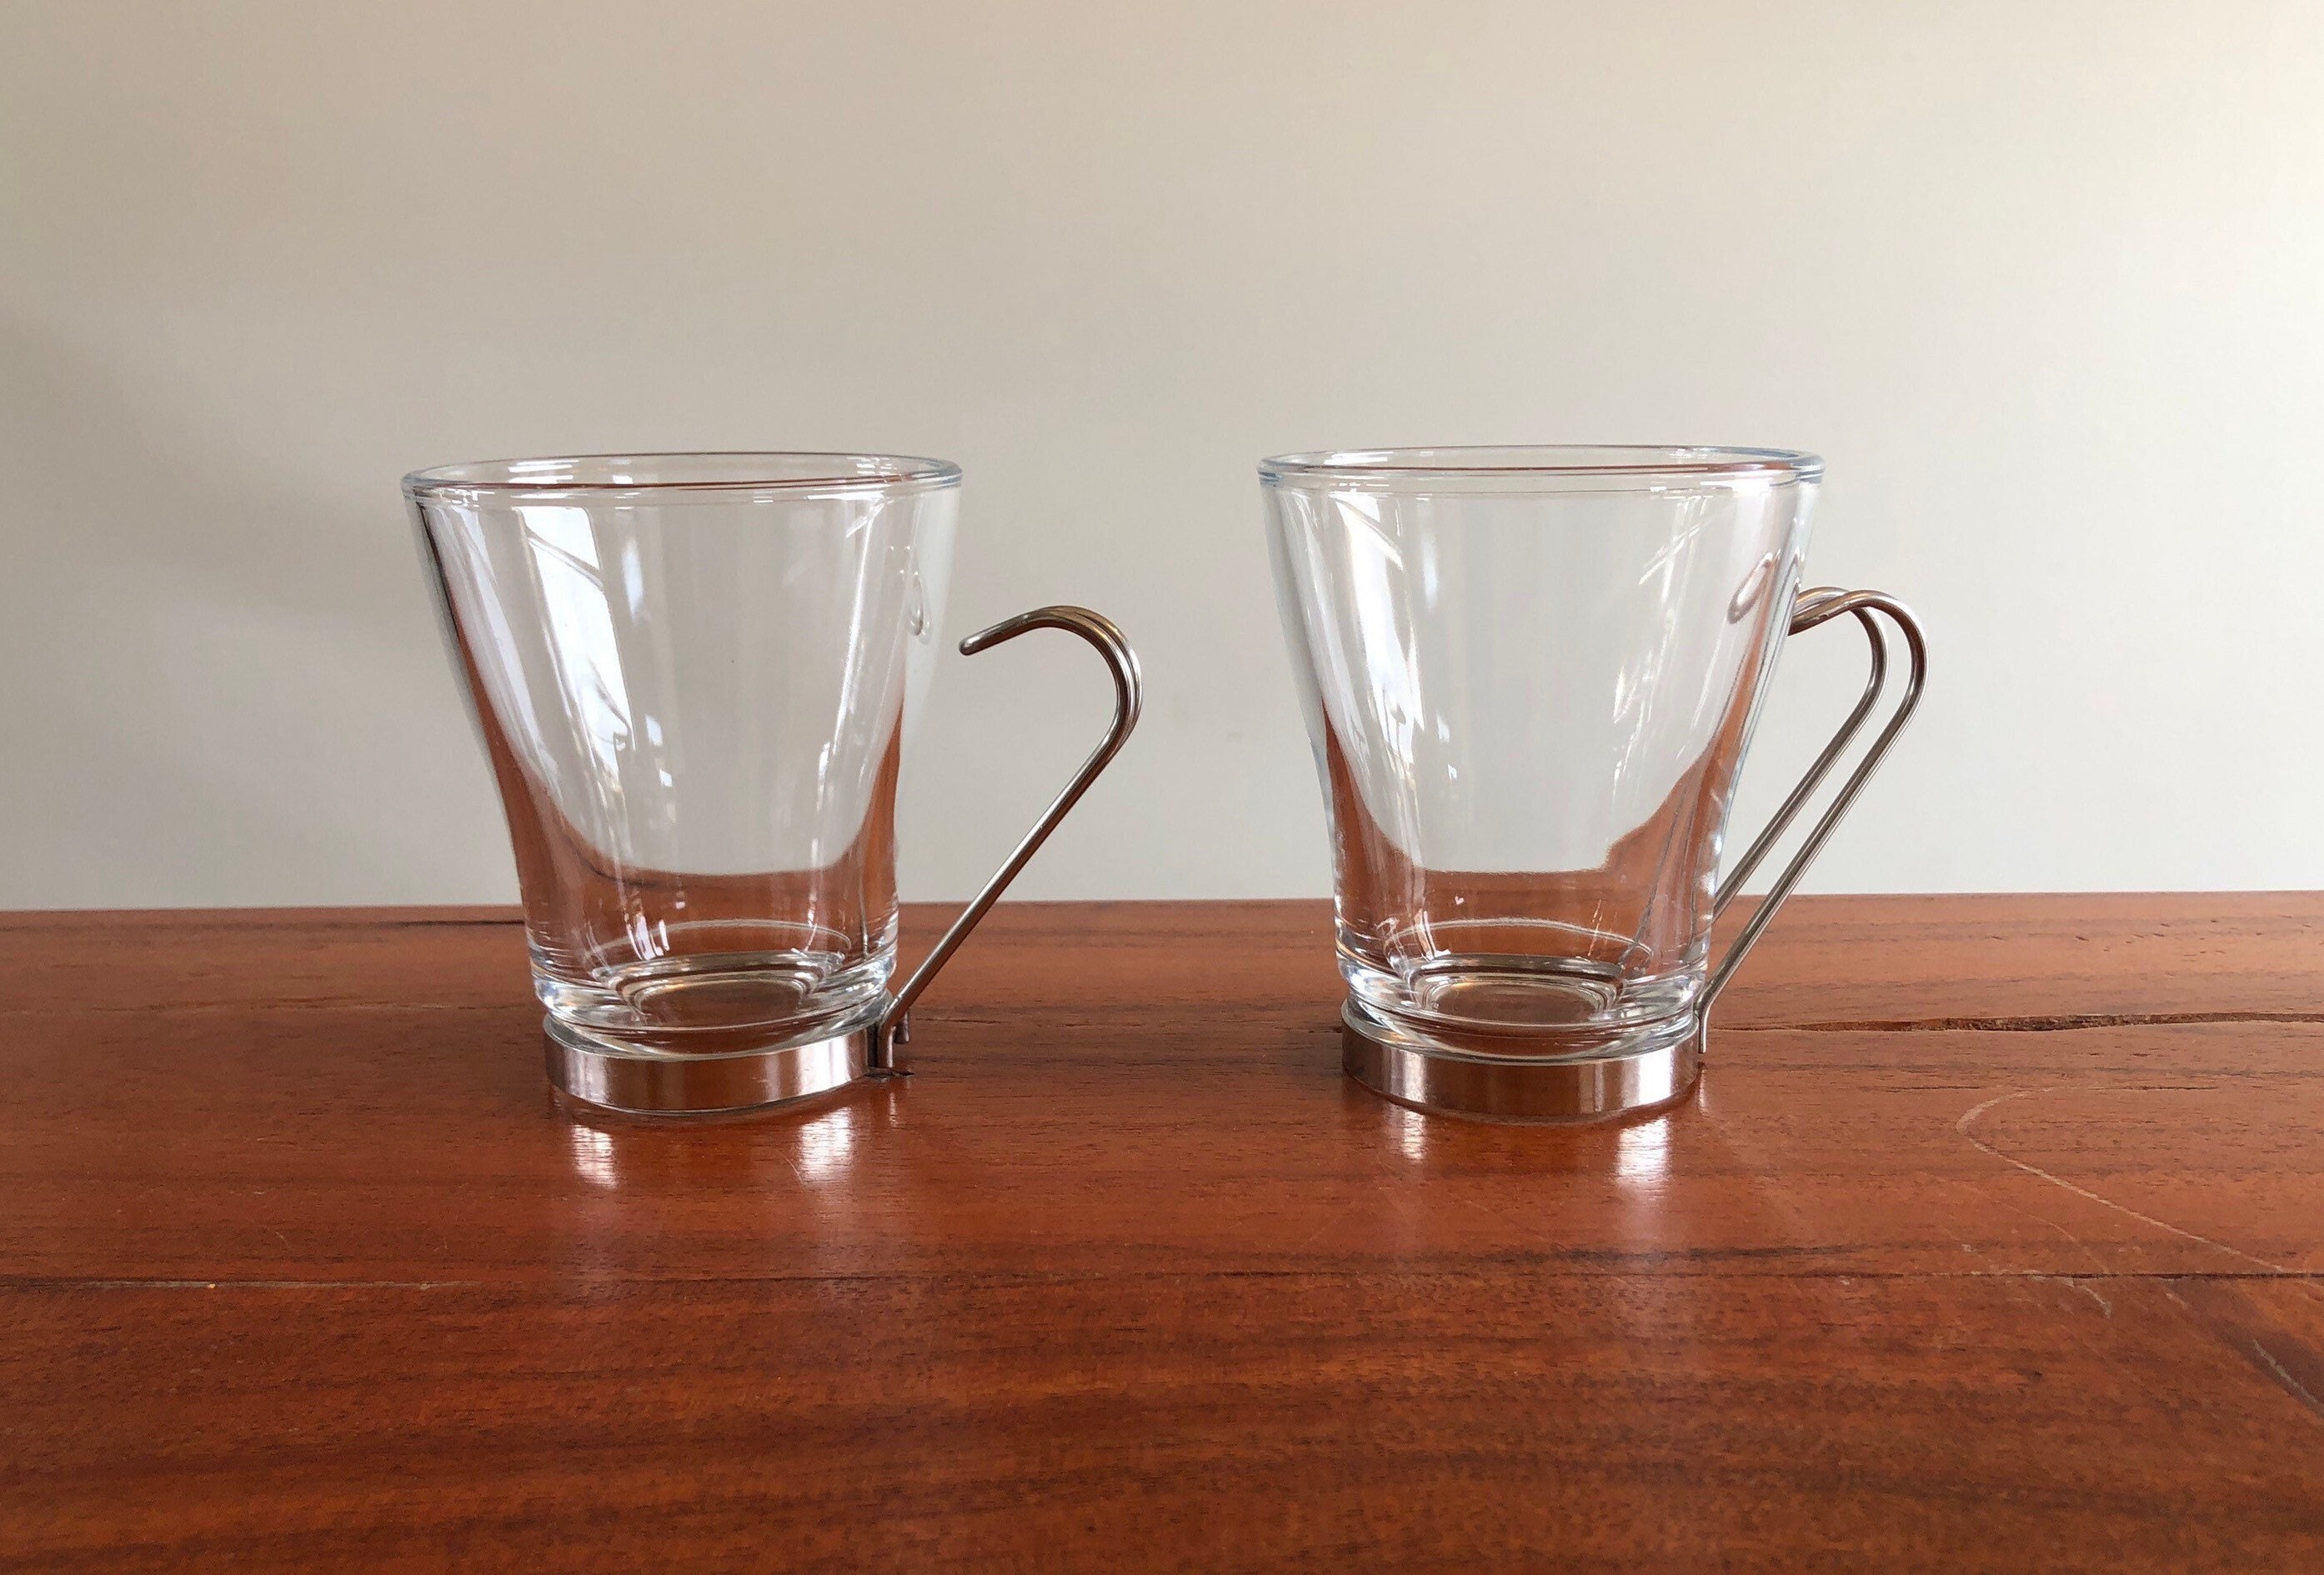 Belle Glass Espresso Cups with Saucer Set - 3.5 oz - Set of 2, 3.5